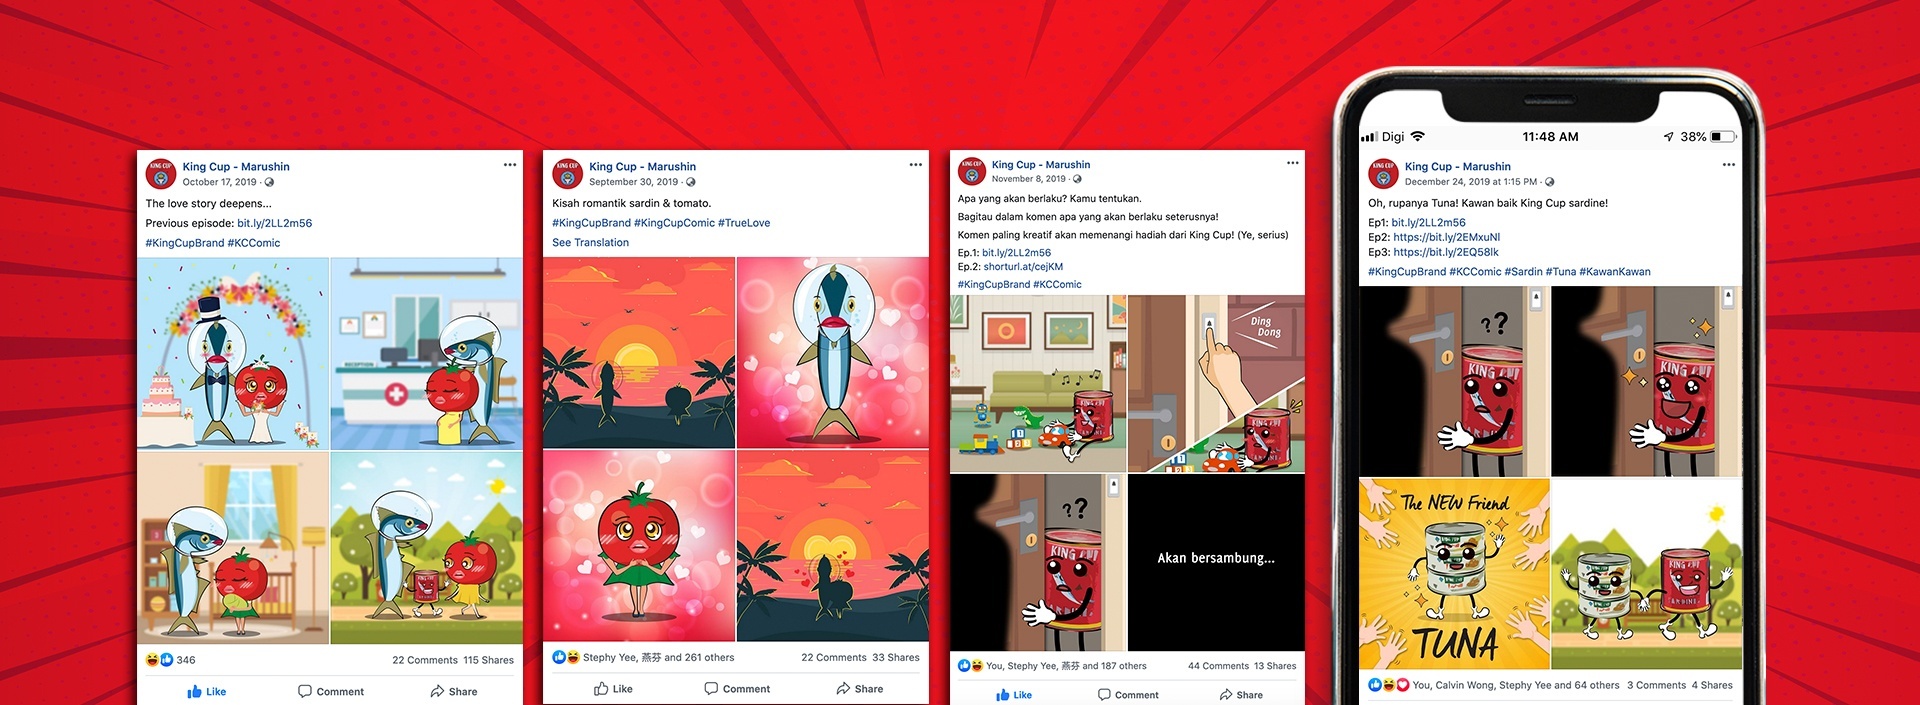 King Cup social media ads portraying food-themed animated characters and a smartphone screen showing one of the ad